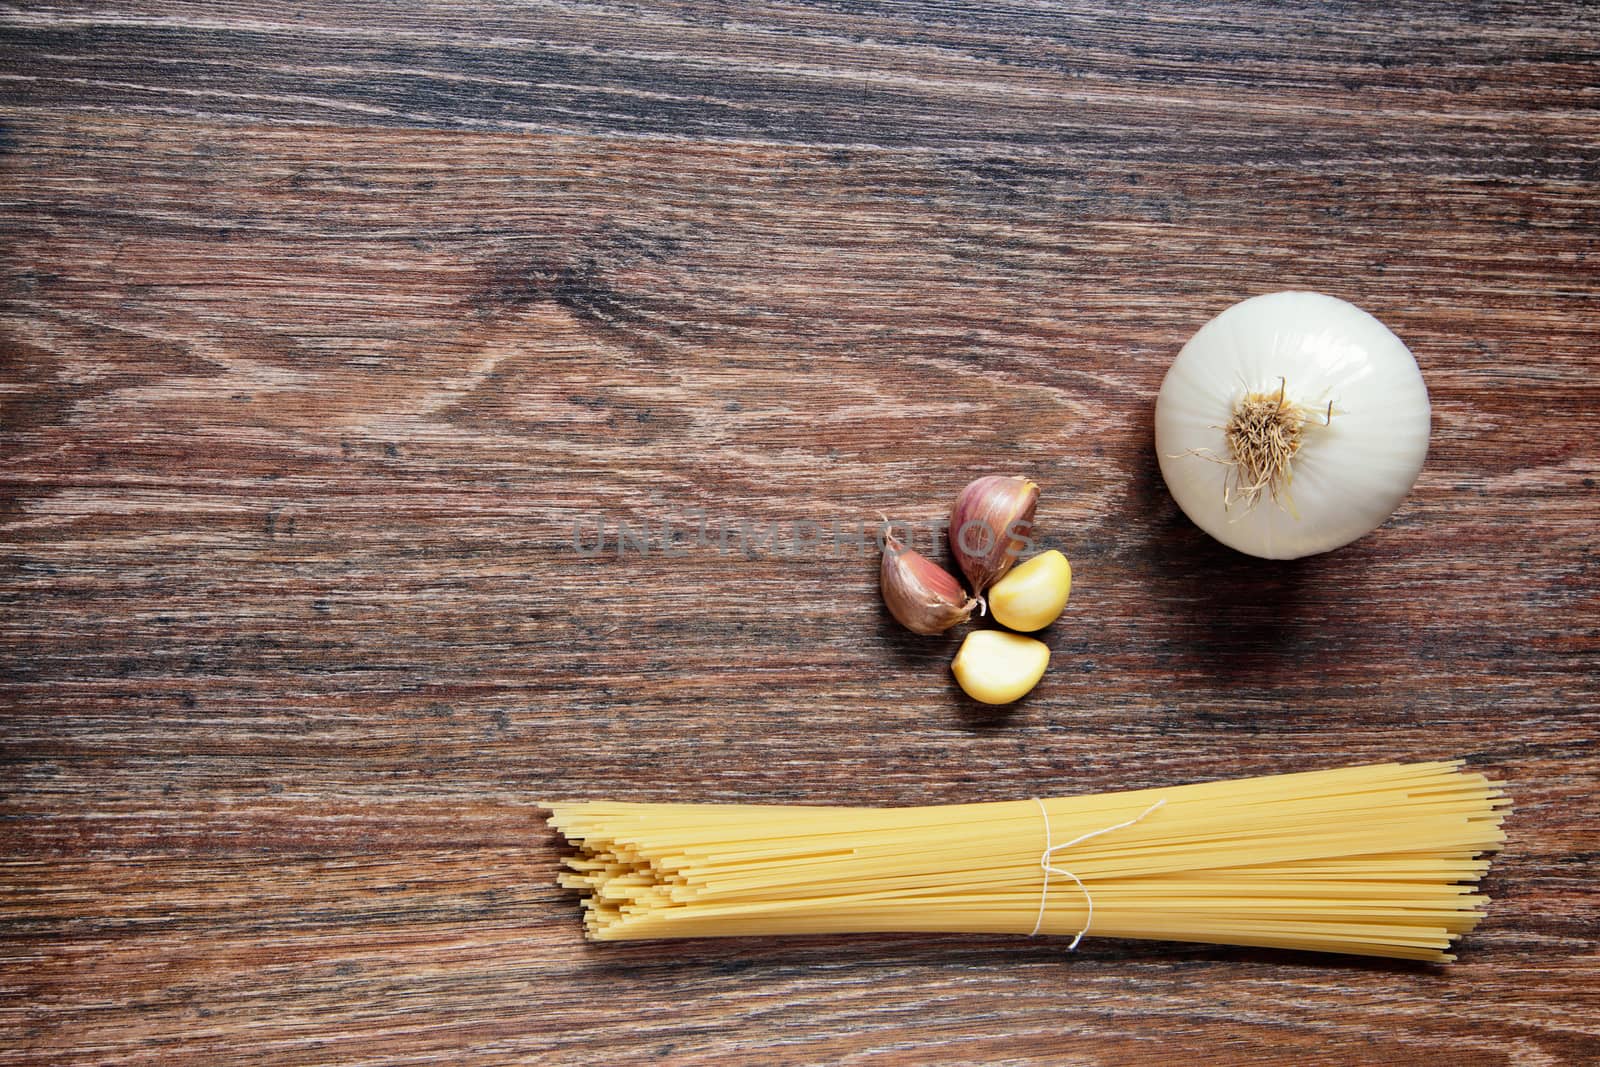 Ingredients for spaghetti bolognese on wooden background. Vegetables on wood. Top View on wooden table with Copy Space